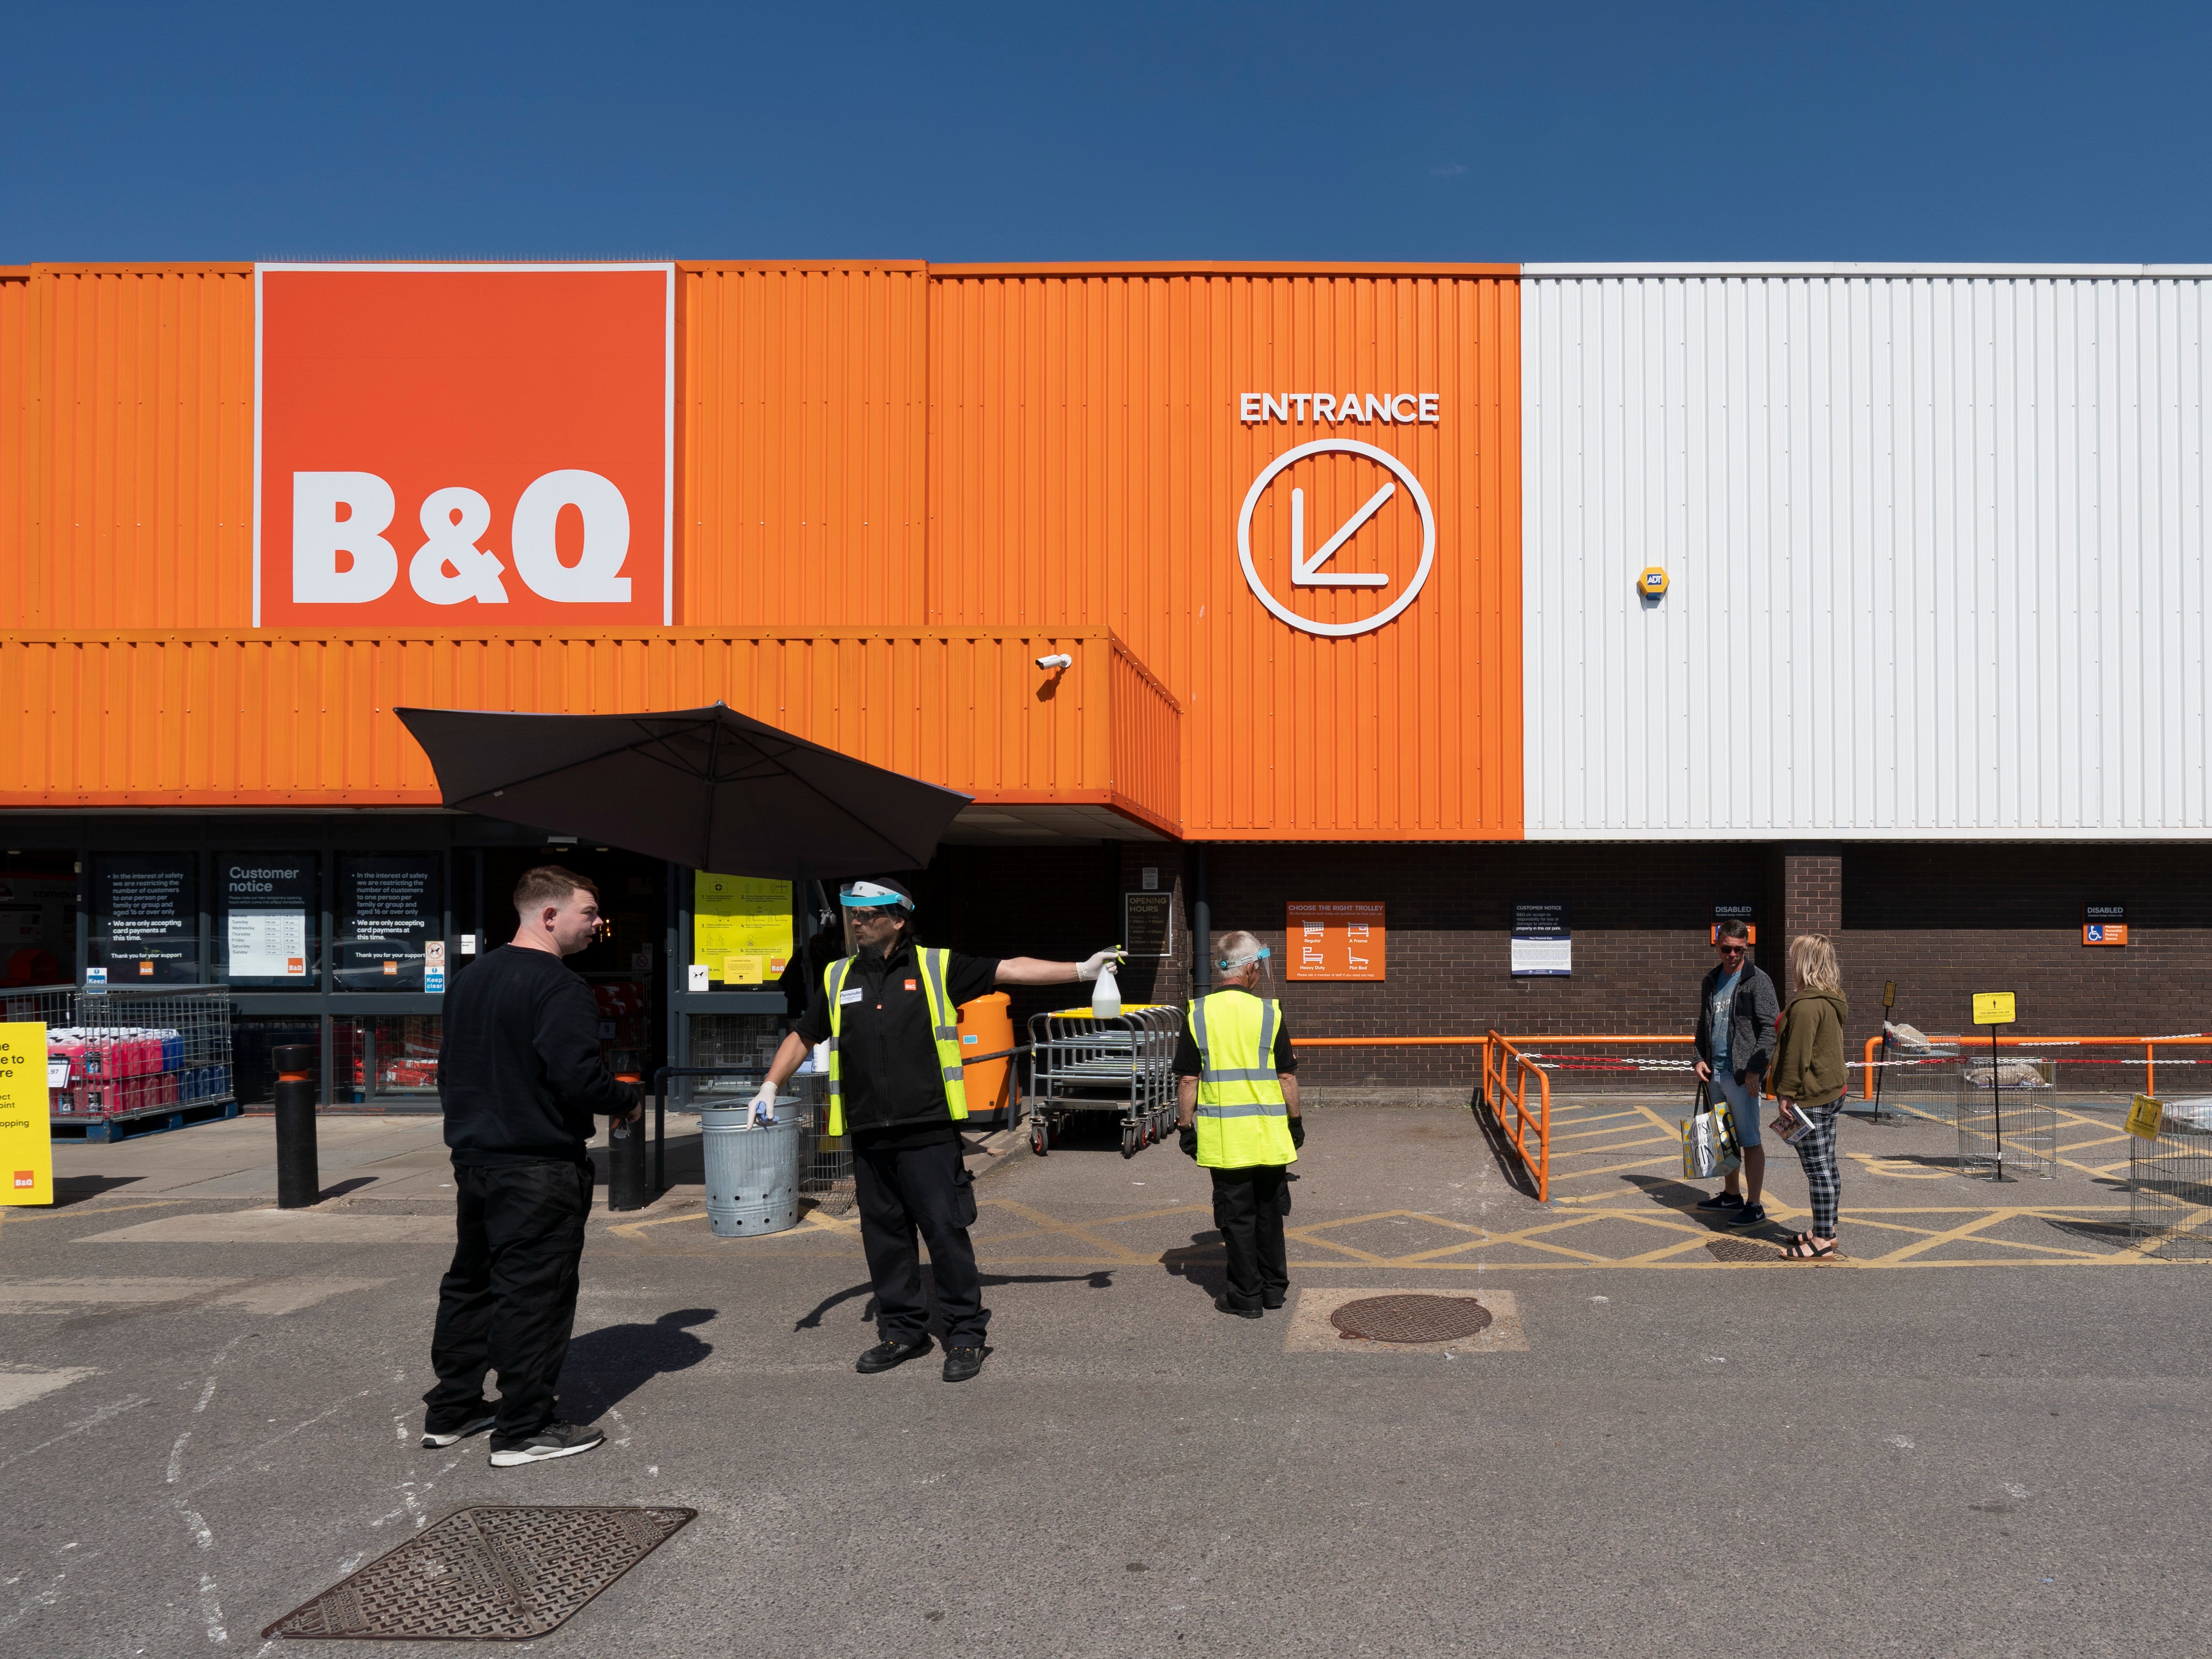 An advert for a radiator cover on B&Q’s retail website diy.com sparked backlash online, after a shopper noticed two ‘white supremacy’ books in an accompanying visual